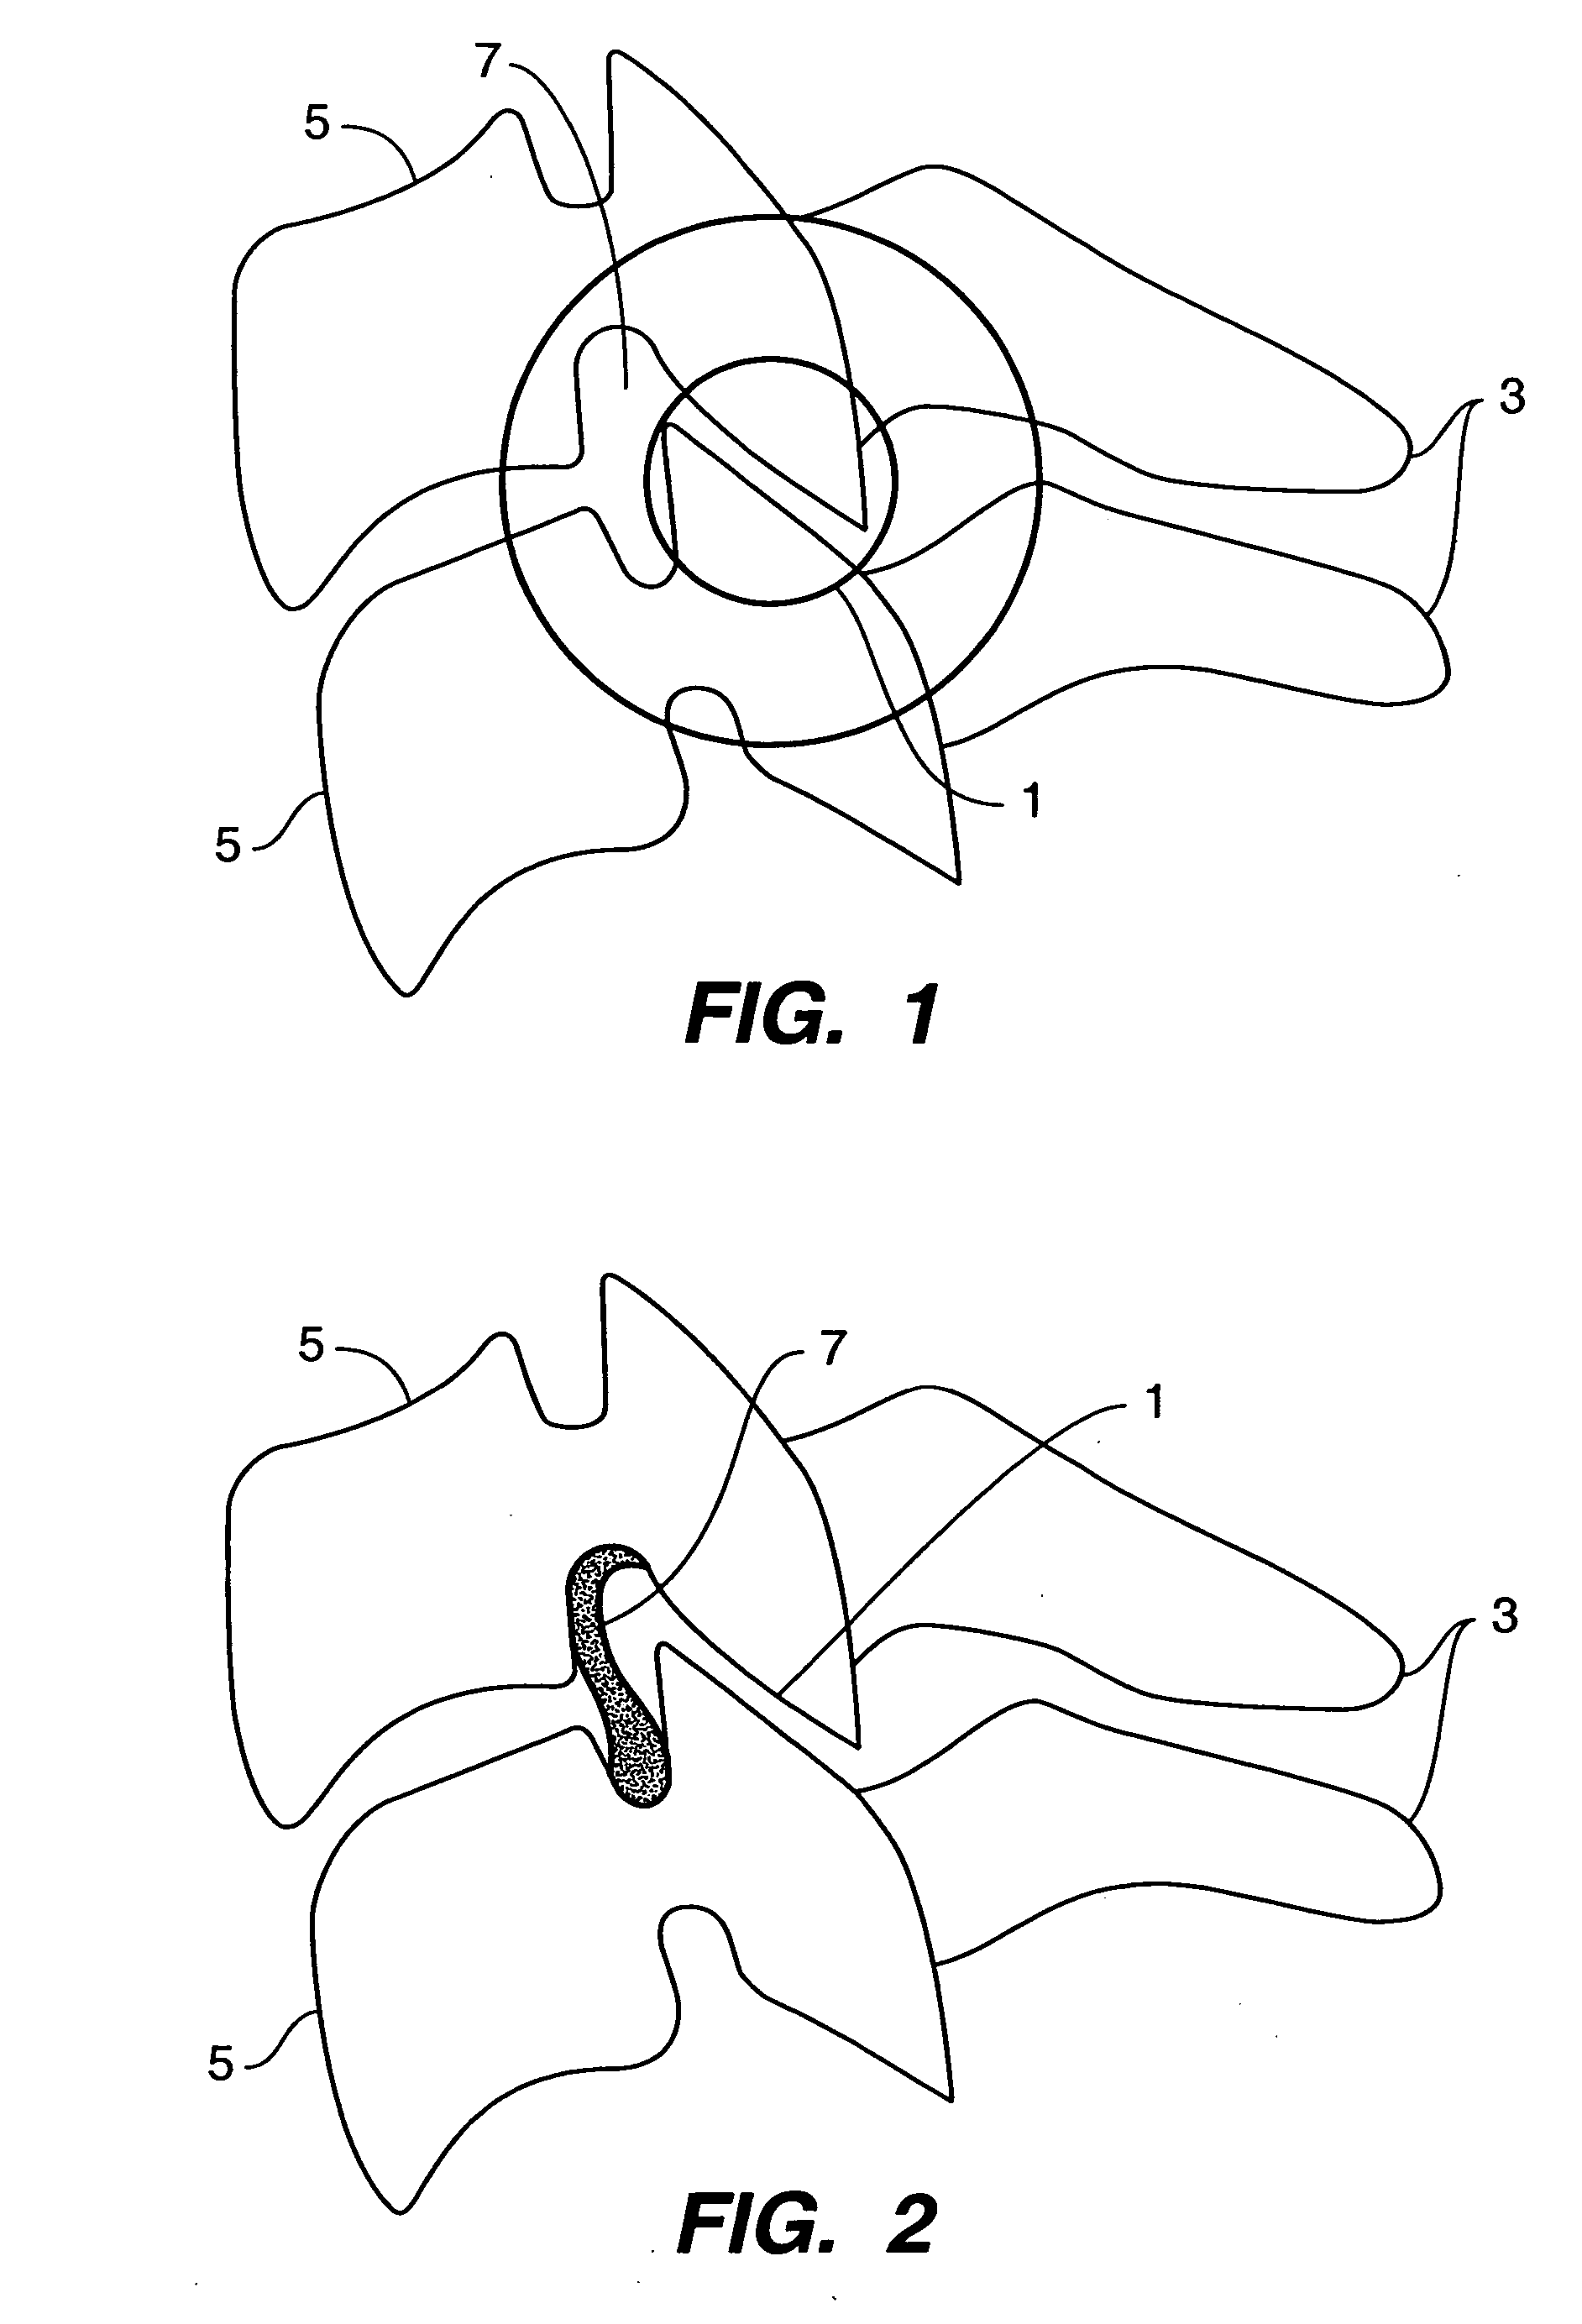 Inter-cervical facet implant and method for preserving the tissues surrounding the facet joint